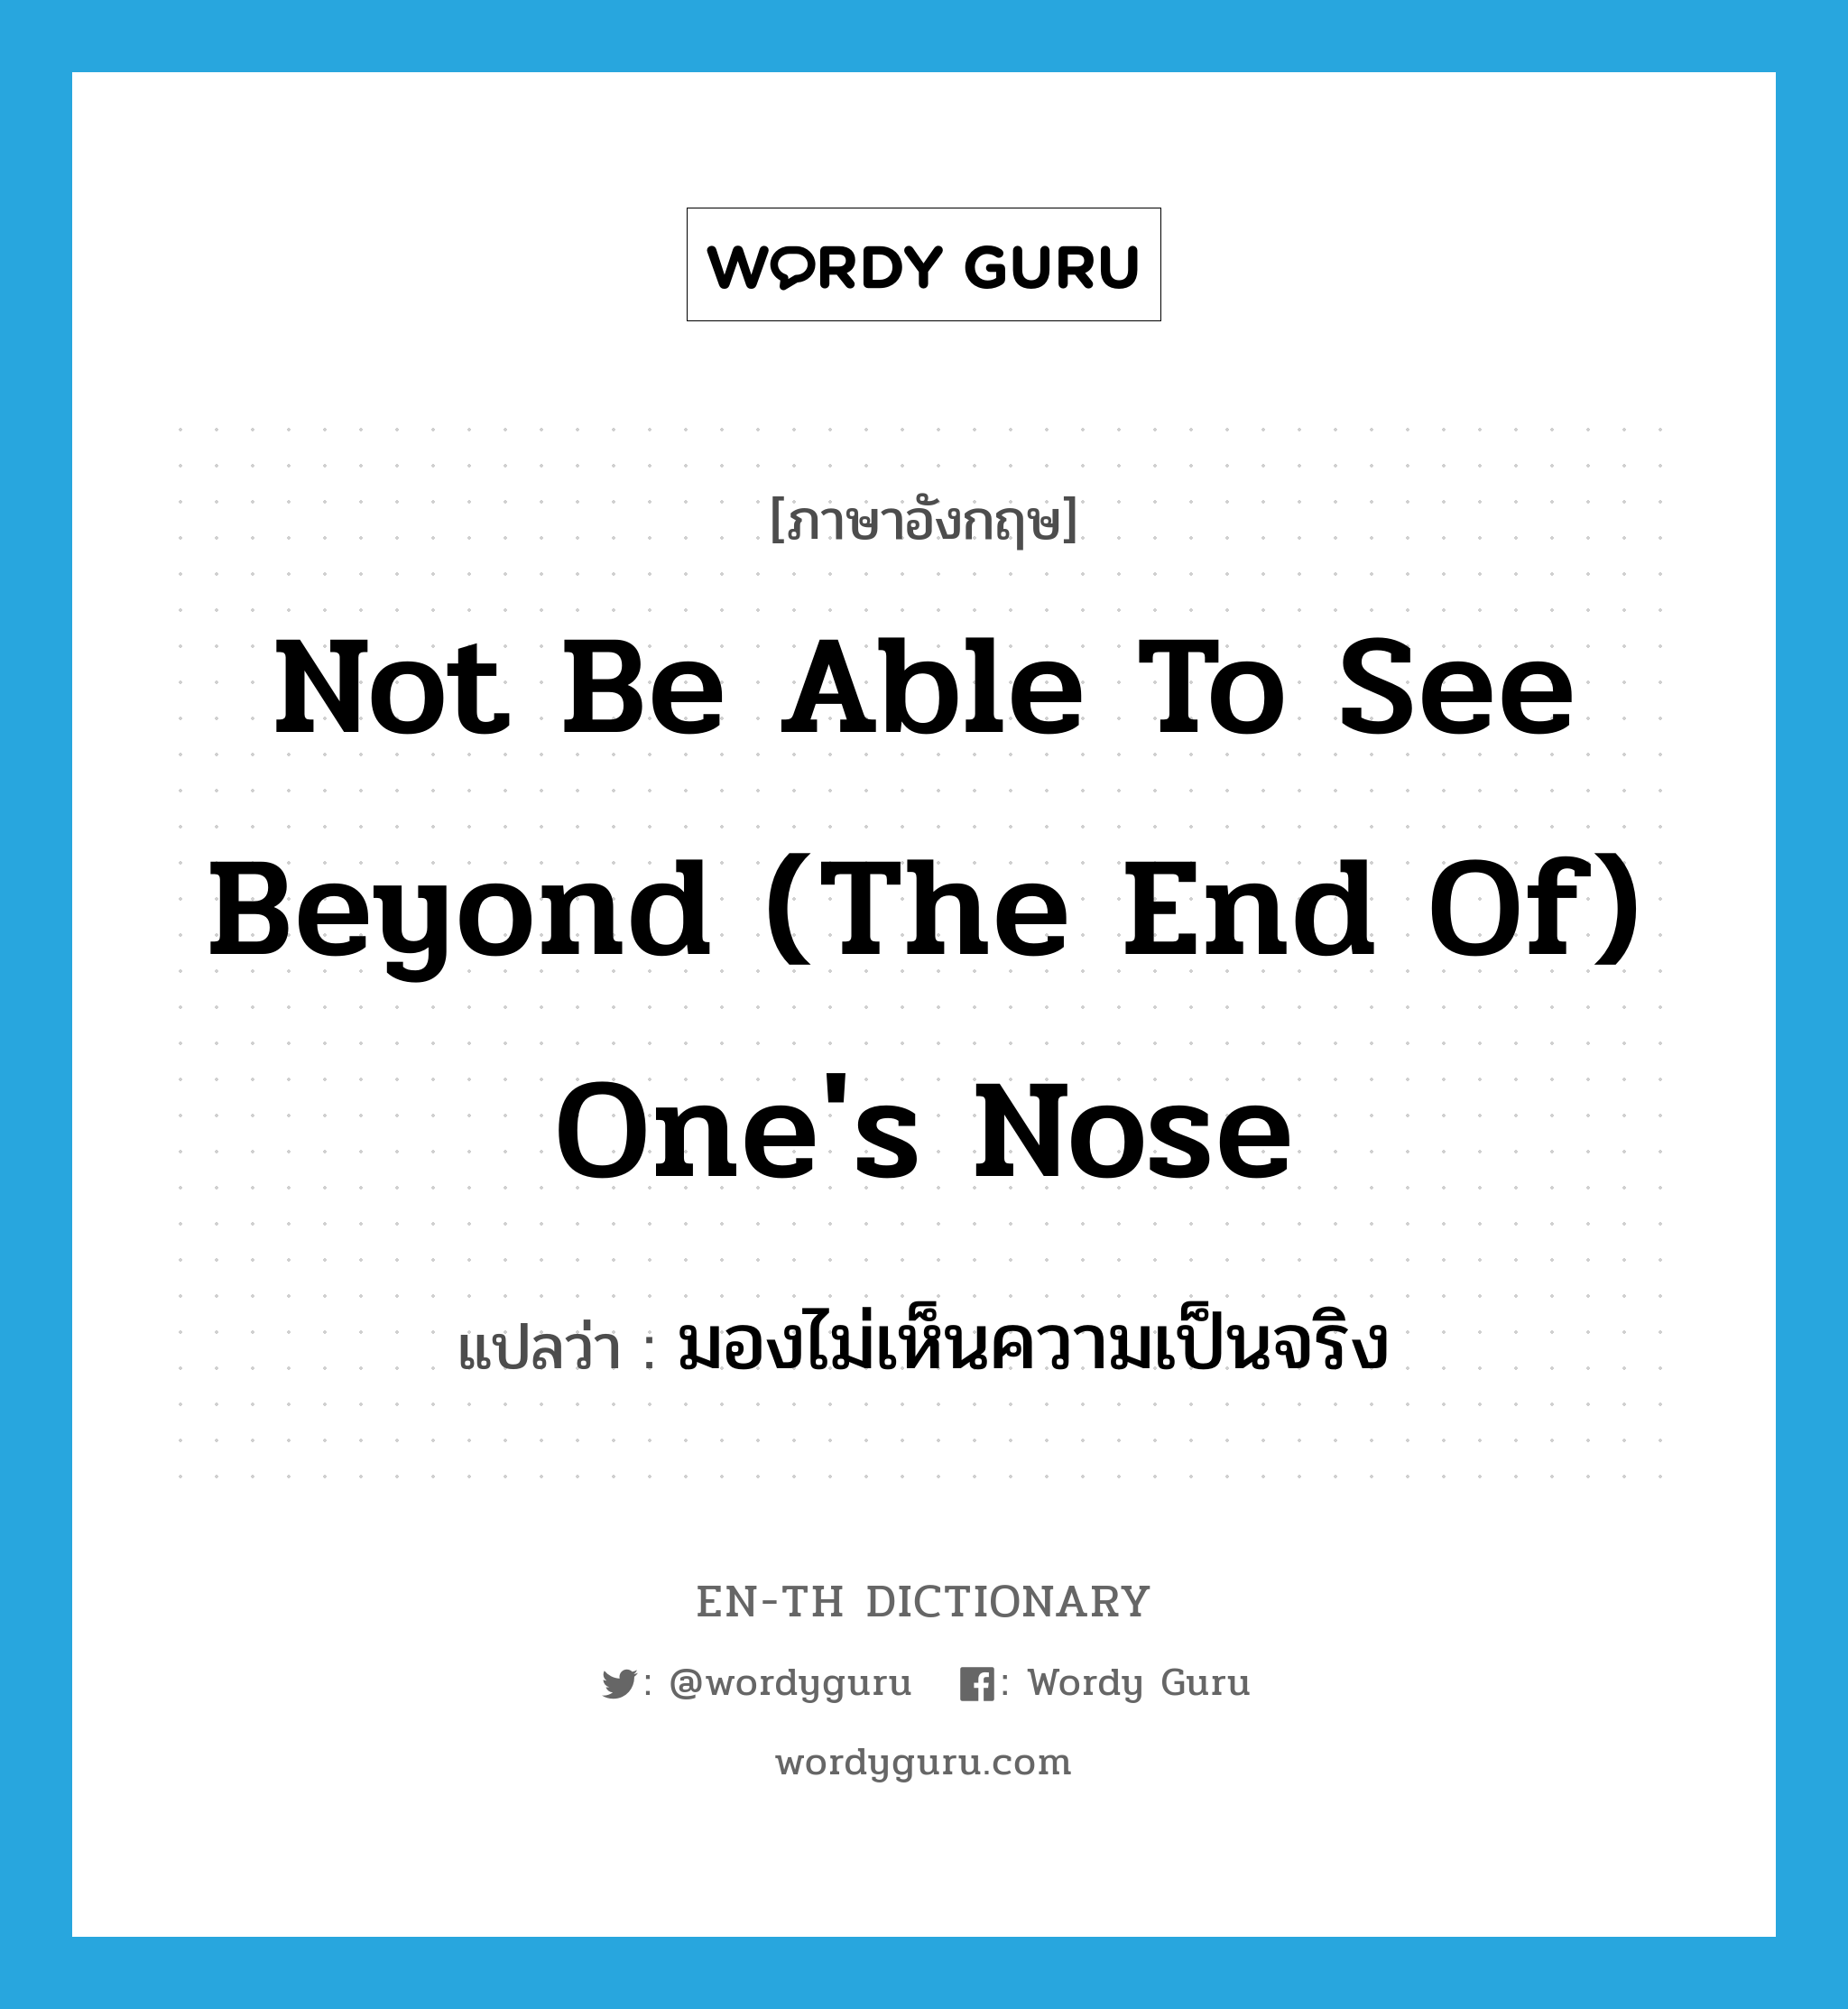 not be able to see beyond (the end of) one's nose แปลว่า?, คำศัพท์ภาษาอังกฤษ not be able to see beyond (the end of) one's nose แปลว่า มองไม่เห็นความเป็นจริง ประเภท IDM หมวด IDM